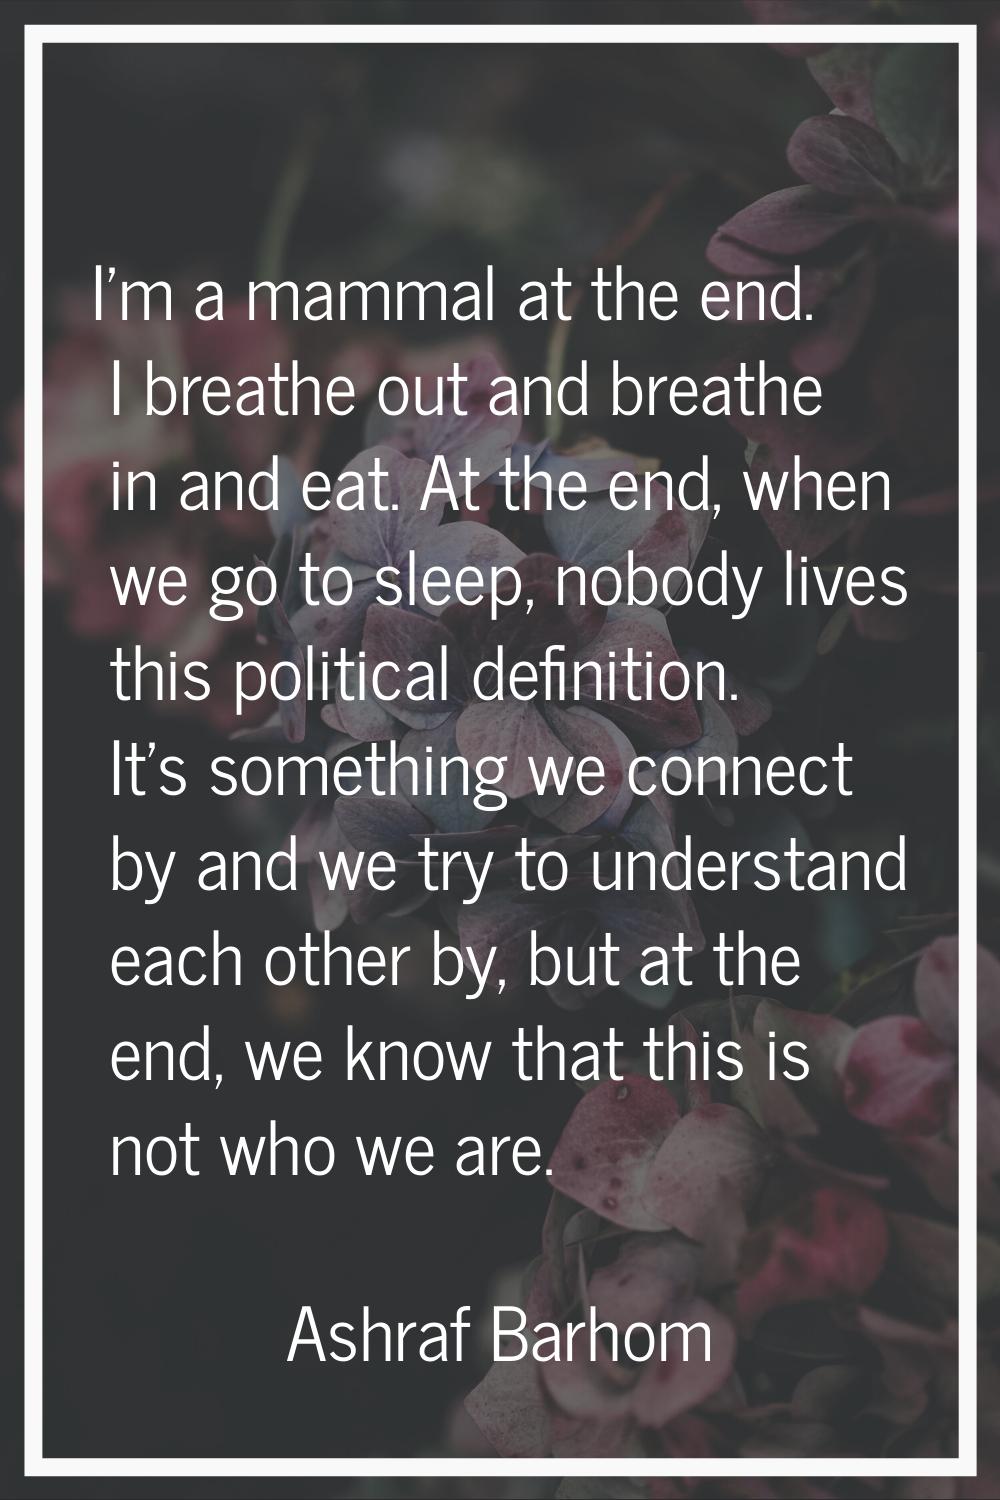 I'm a mammal at the end. I breathe out and breathe in and eat. At the end, when we go to sleep, nob